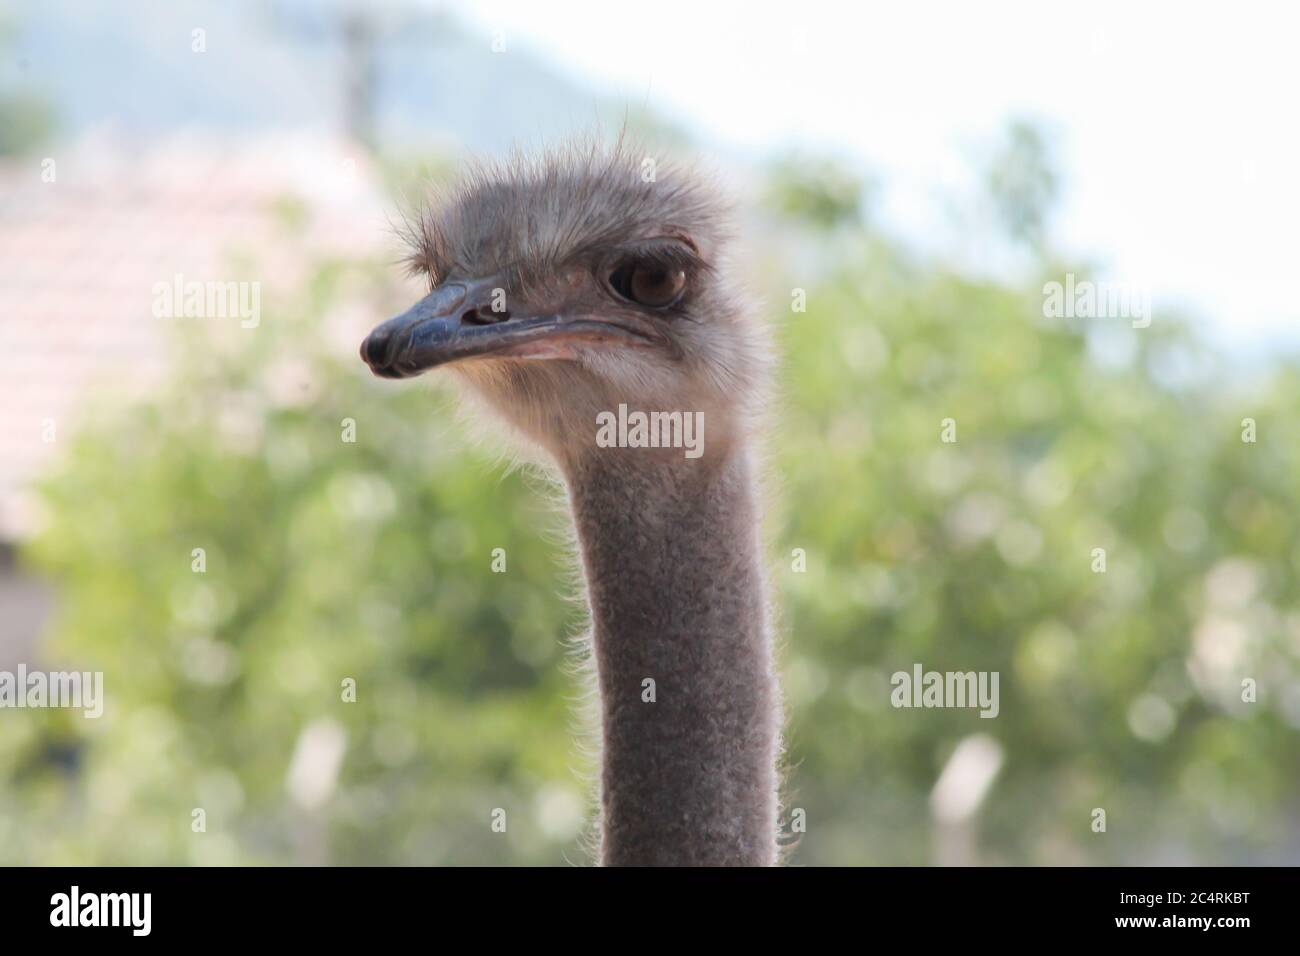 Ostrich bird front portrait on the farm green background. Ostrich head and neck. Stock Photo